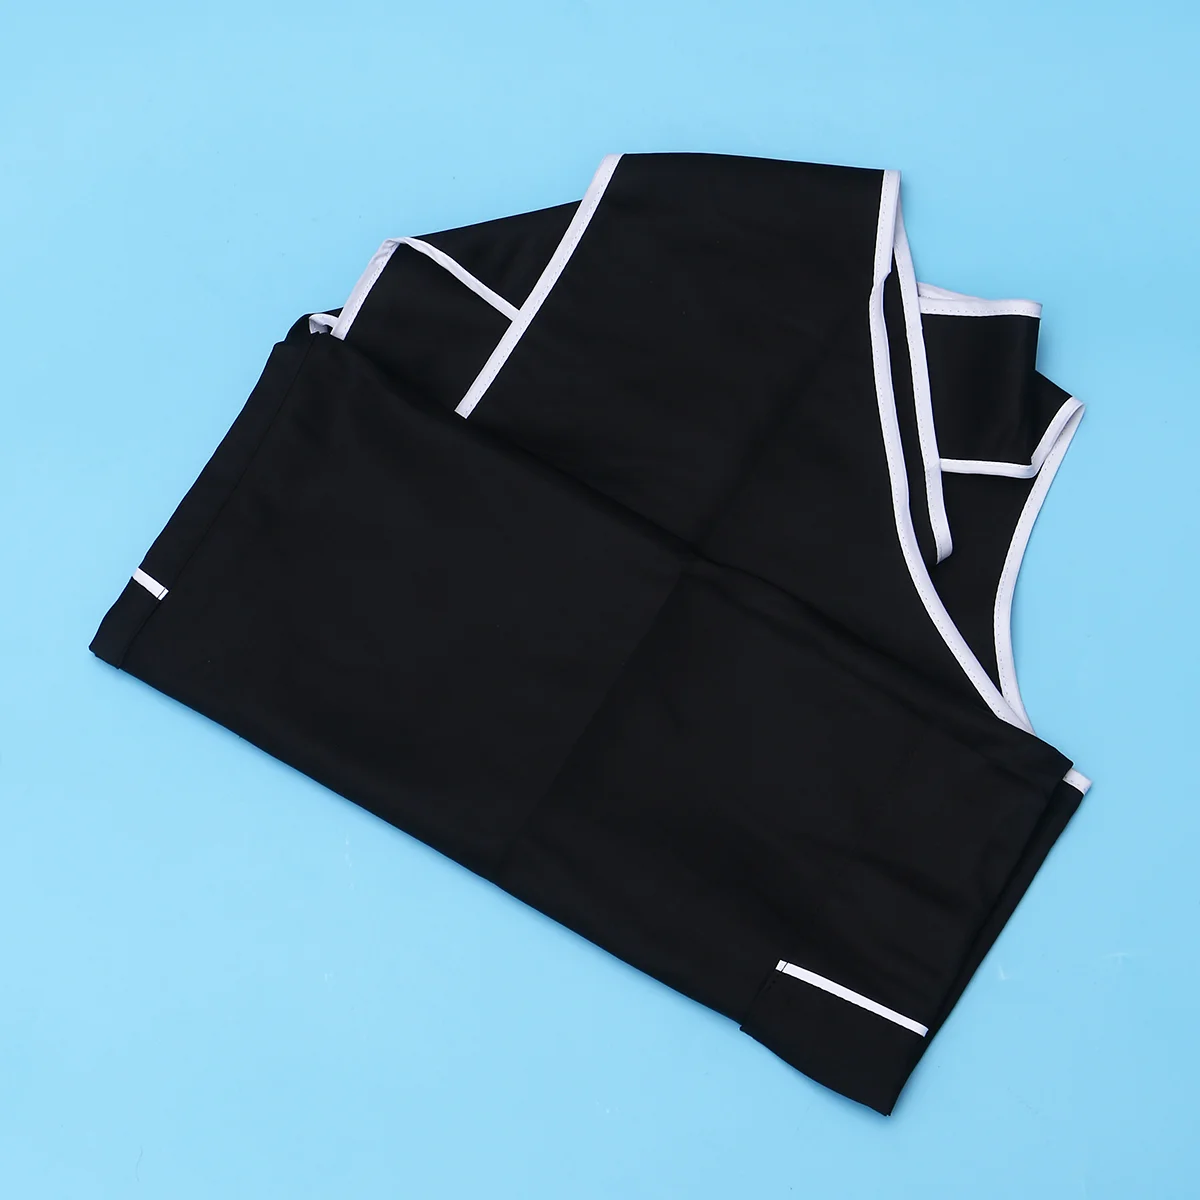 

Apron Hair Aprons Hairdresser Barber Stylist Salon Cape Cutting Women Hairdressing Uniform Gown Smock Cloth Hairstylist Haircut